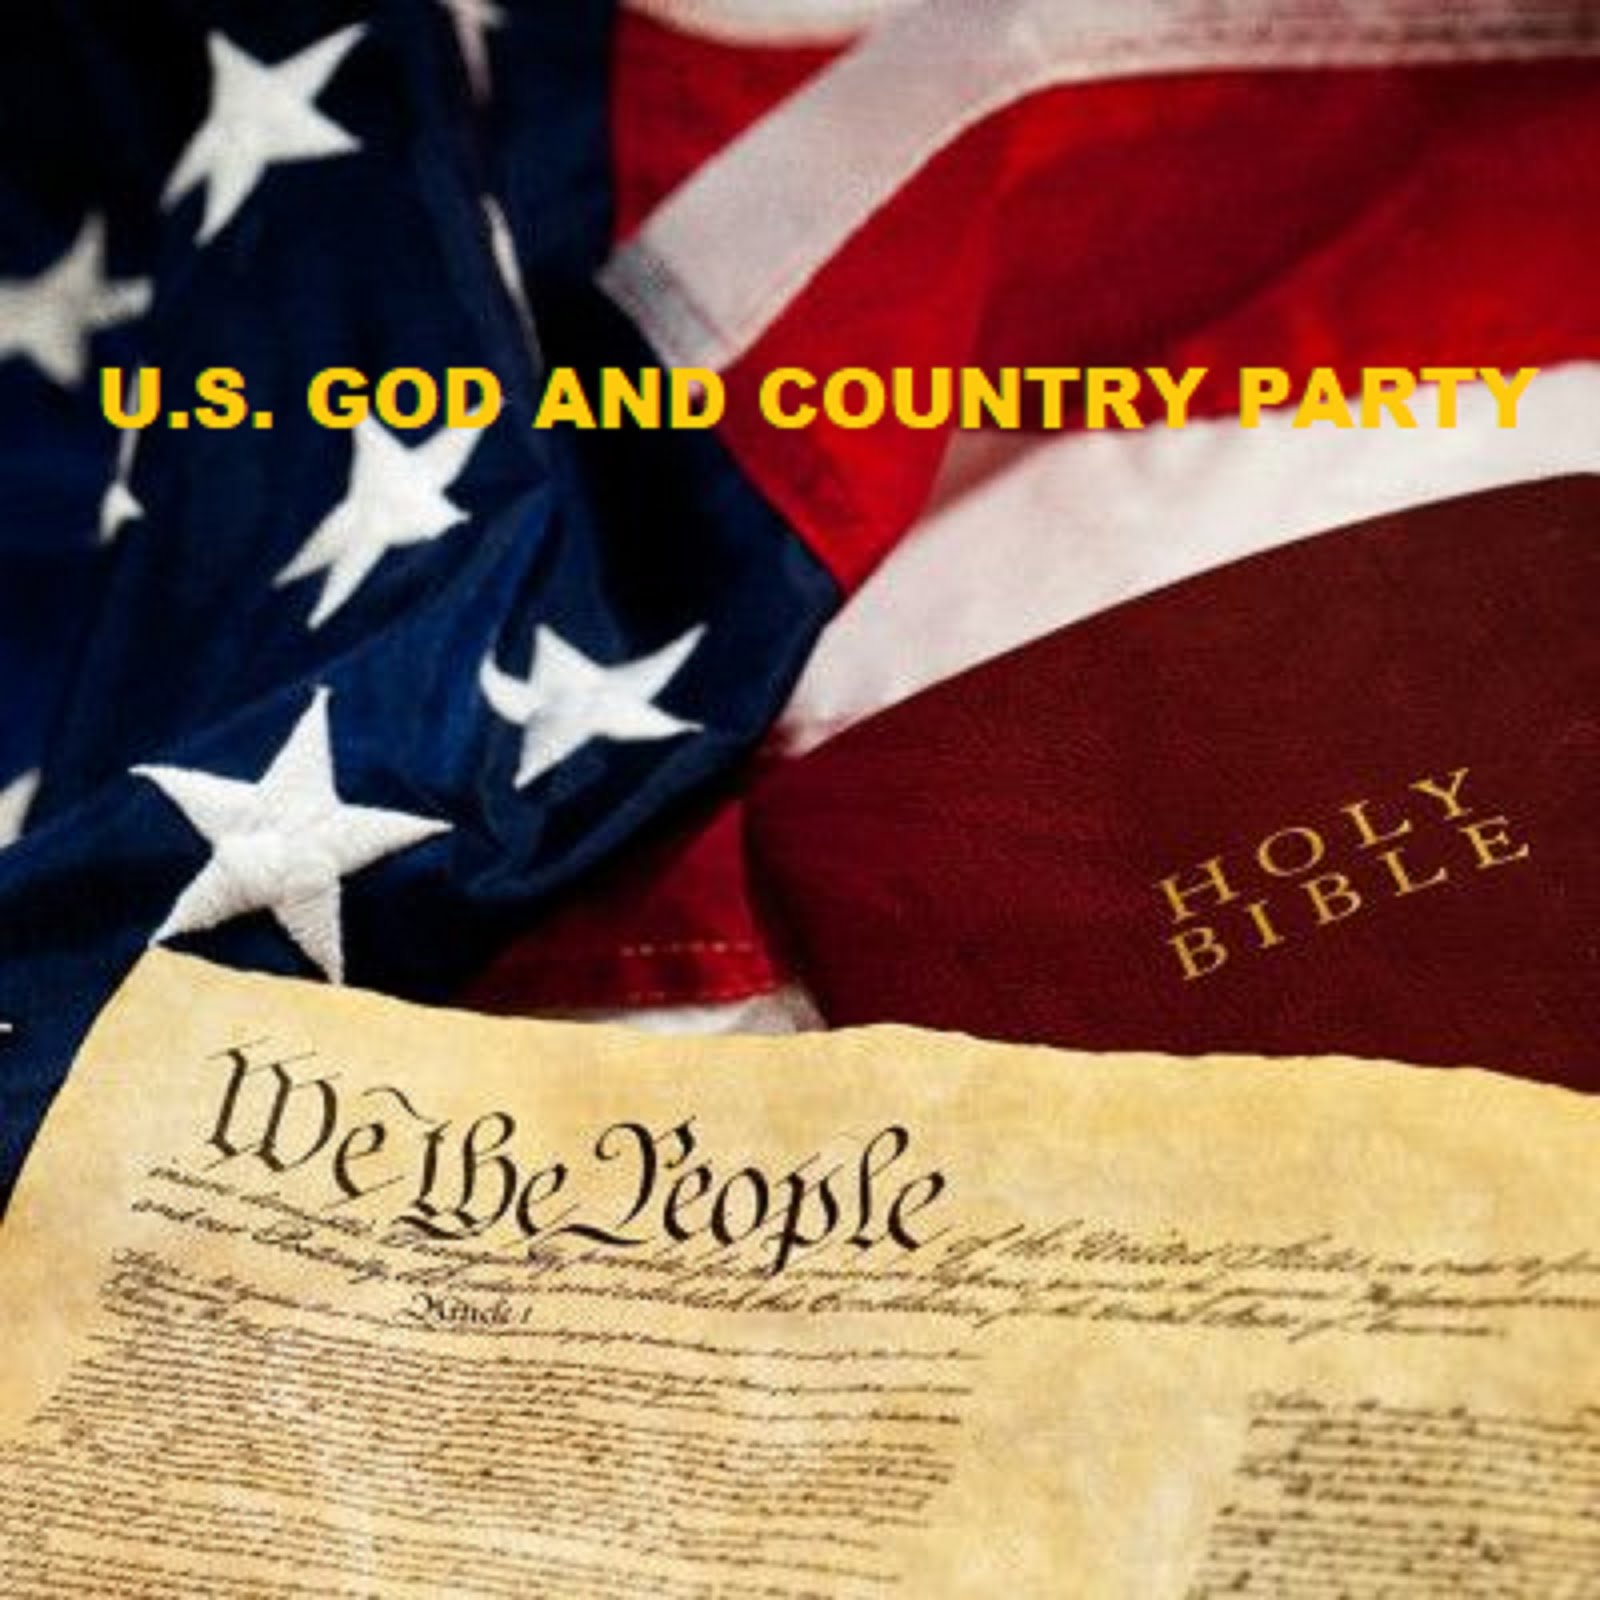 GOD AND COUNTRY PARTY